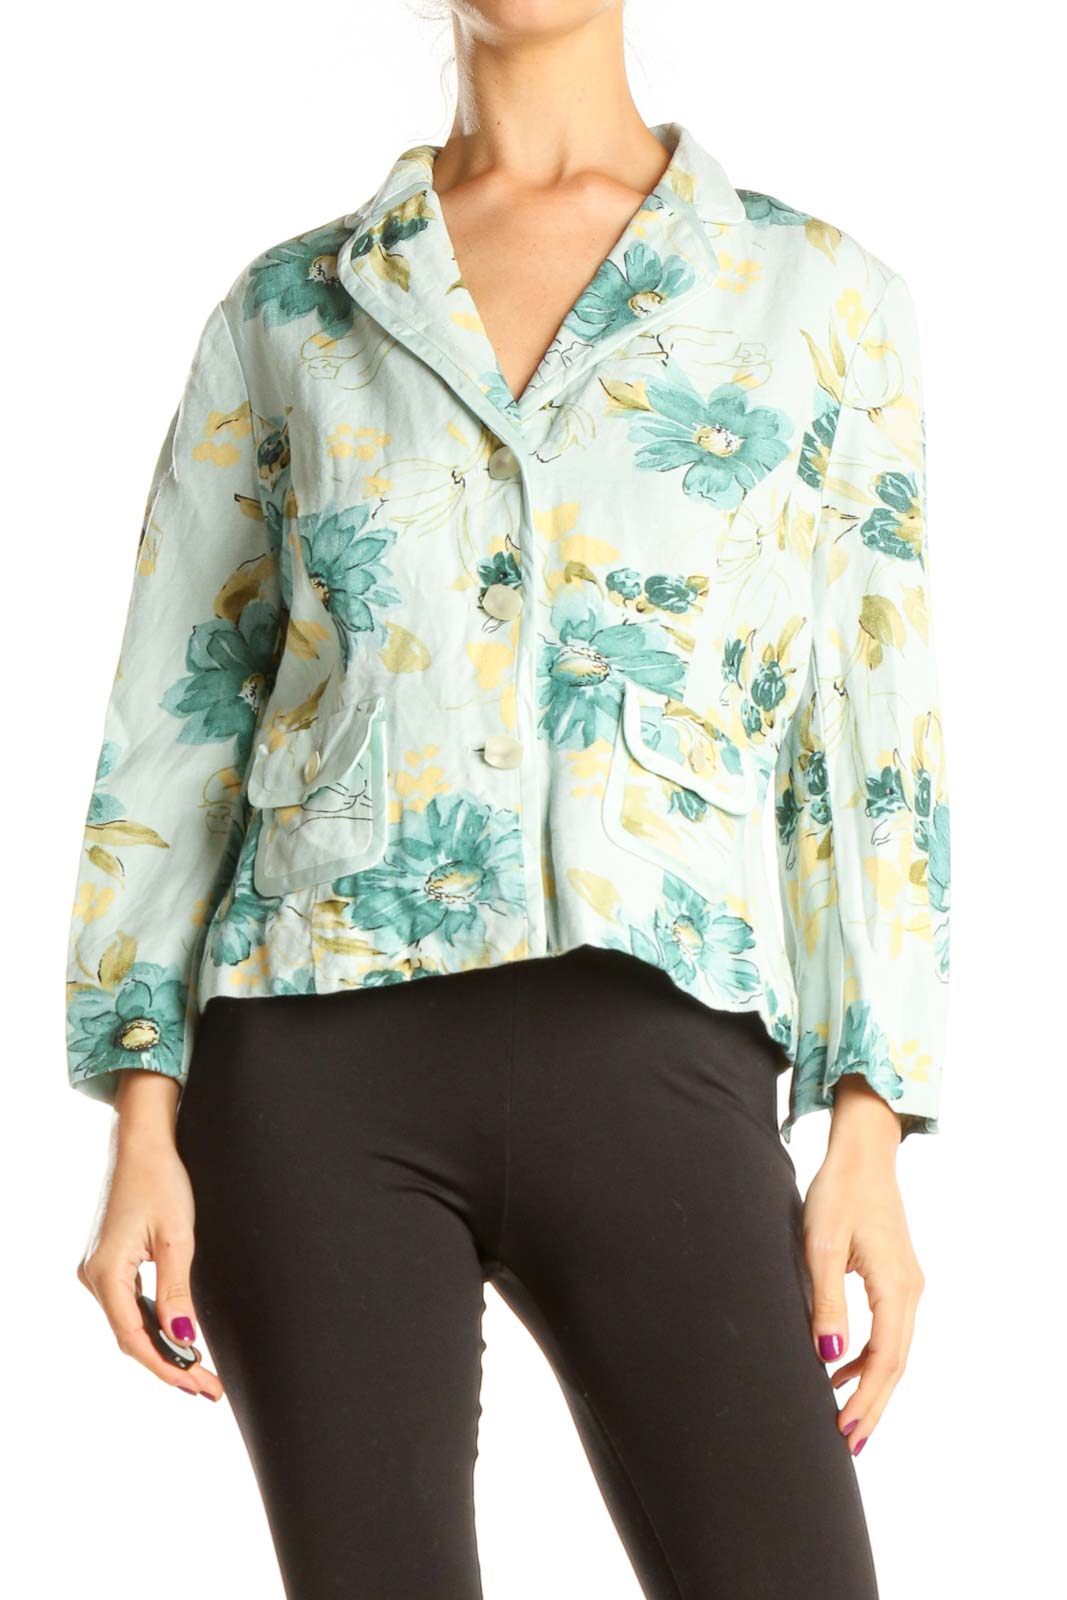 Blue Yellow Retro Floral Print Jacket Front